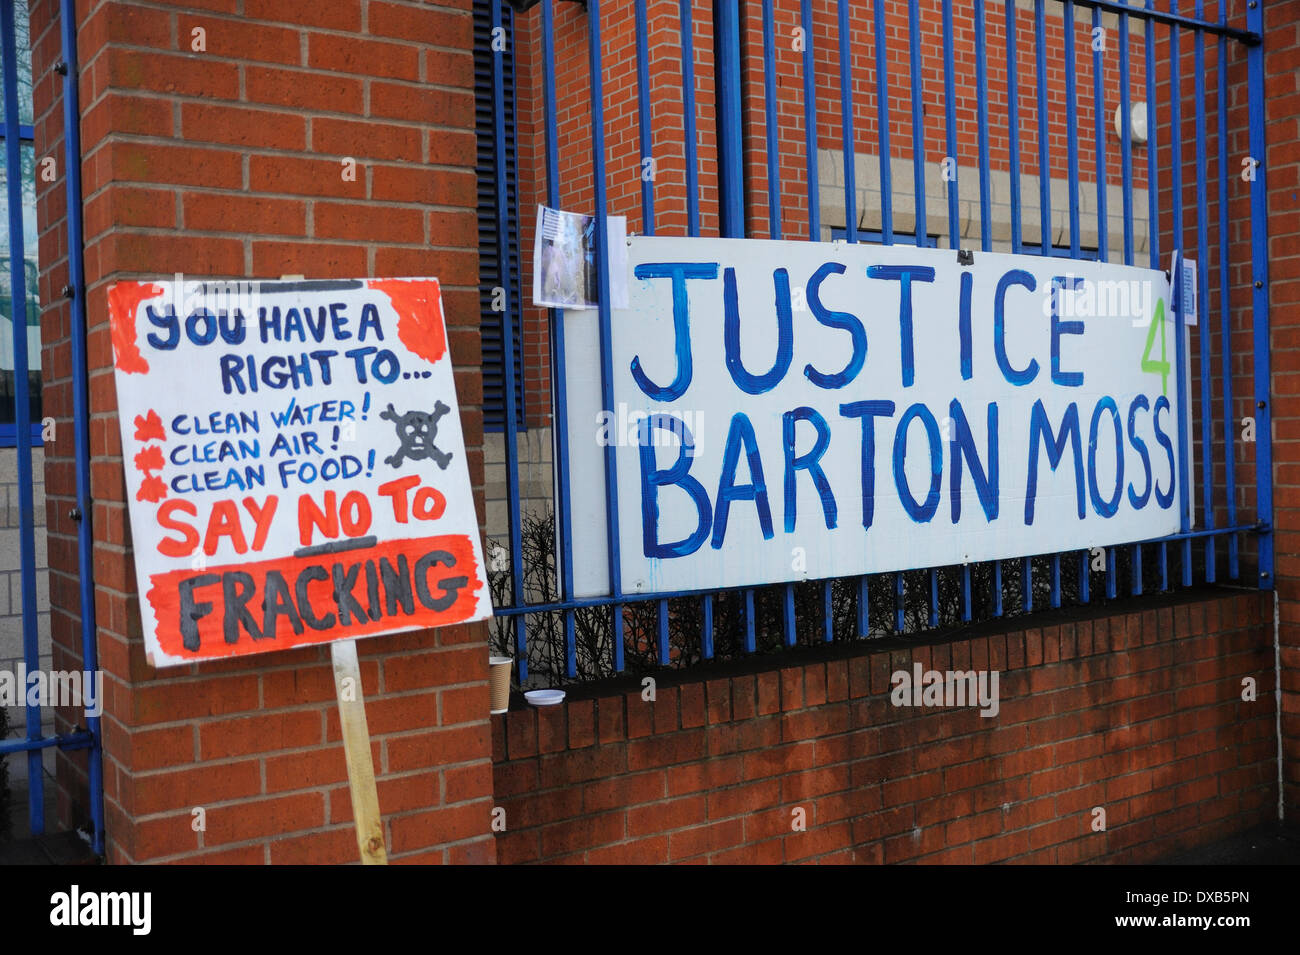 Swinton, Salford, Manchester, UK . 22nd March 2014. Anti-fracking campaigners protest outside Swinton police station, Salford, Manchester. Anti-fracking sign next to a justice 4 Barton Moss sign. Credit:  Dave Ellison/Alamy Live News Stock Photo